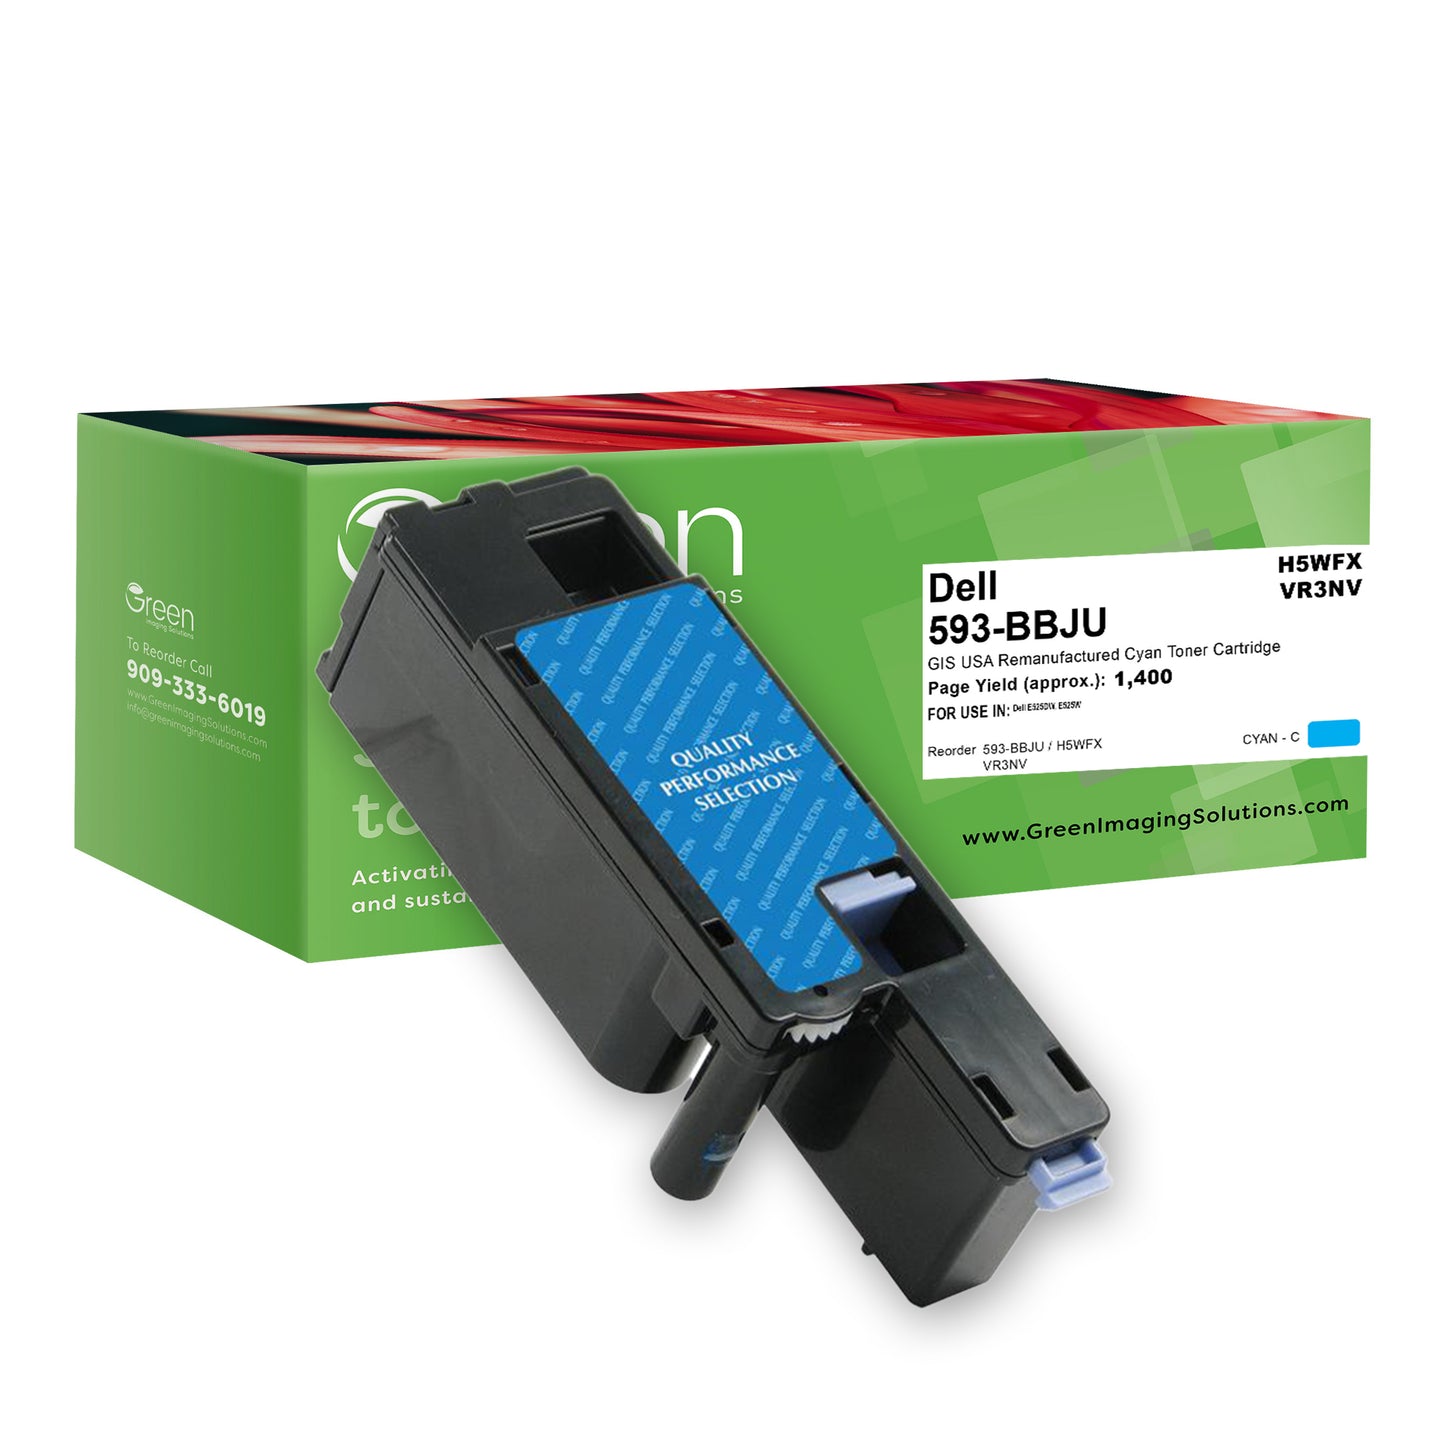 Green Imaging Solutions USA Remanufactured Cyan Toner Cartridge for Dell E525